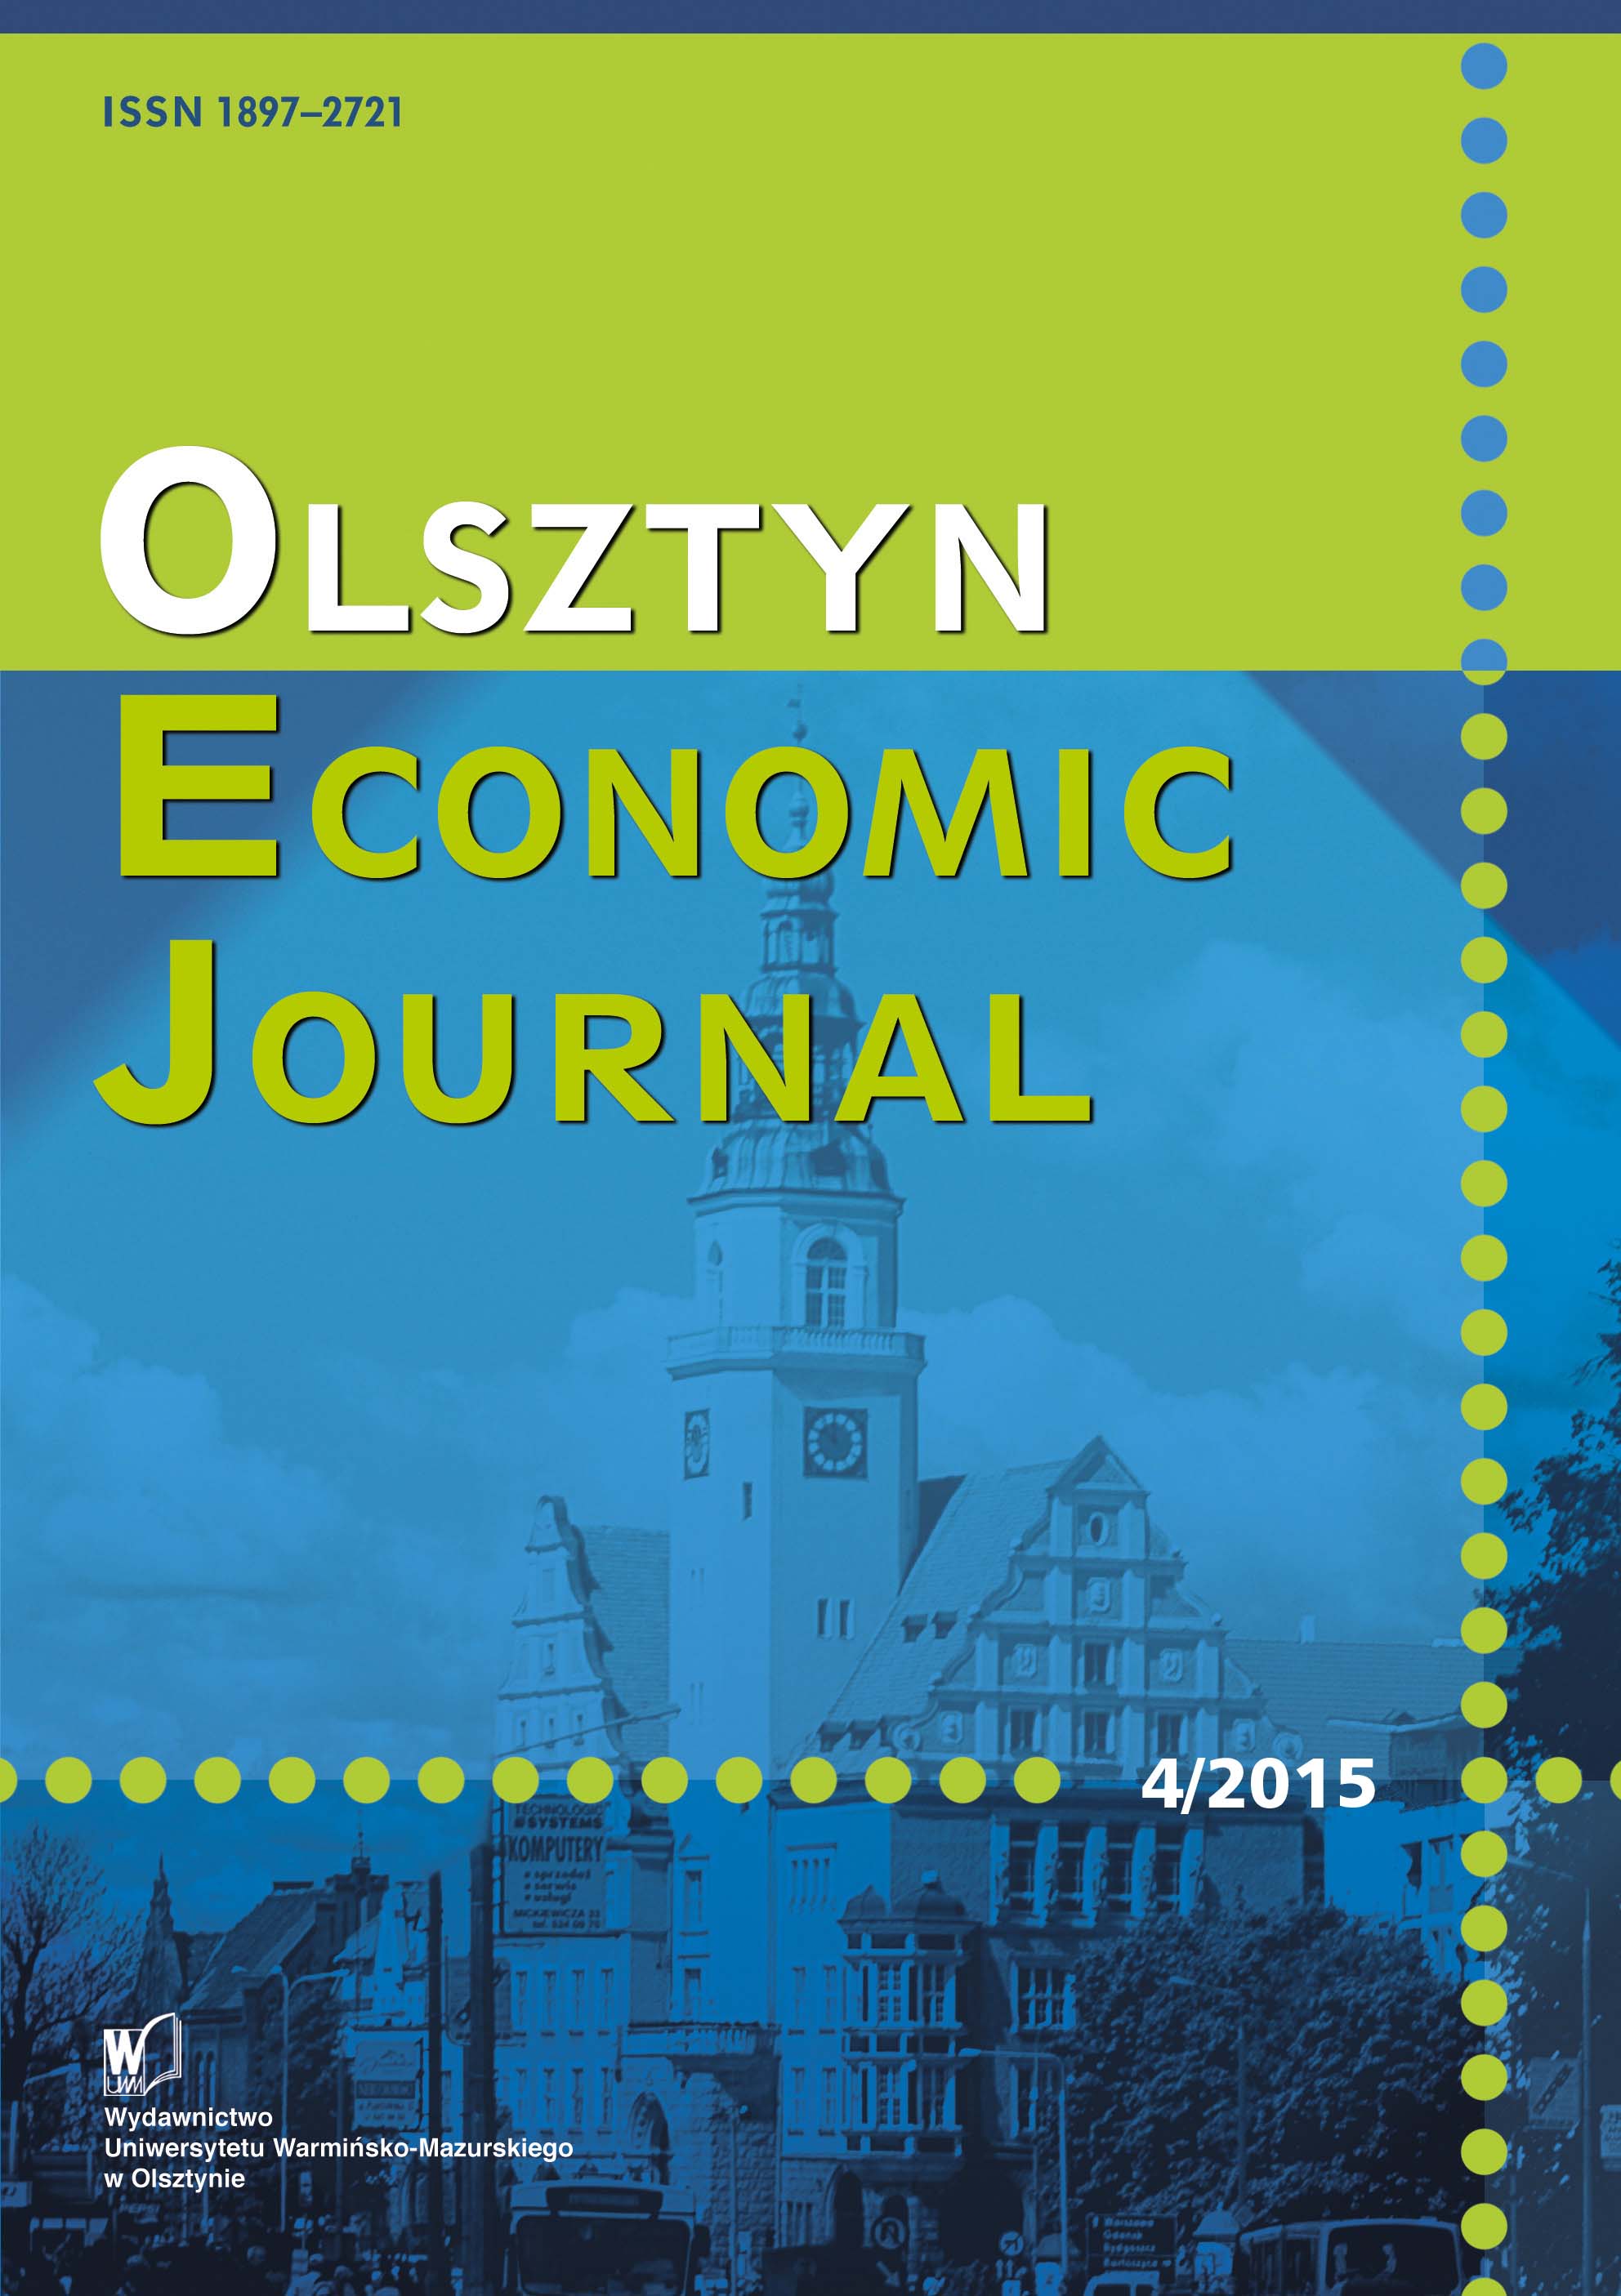 Insurance Against Longevity Risk in a Pension System the Case Study of Poland